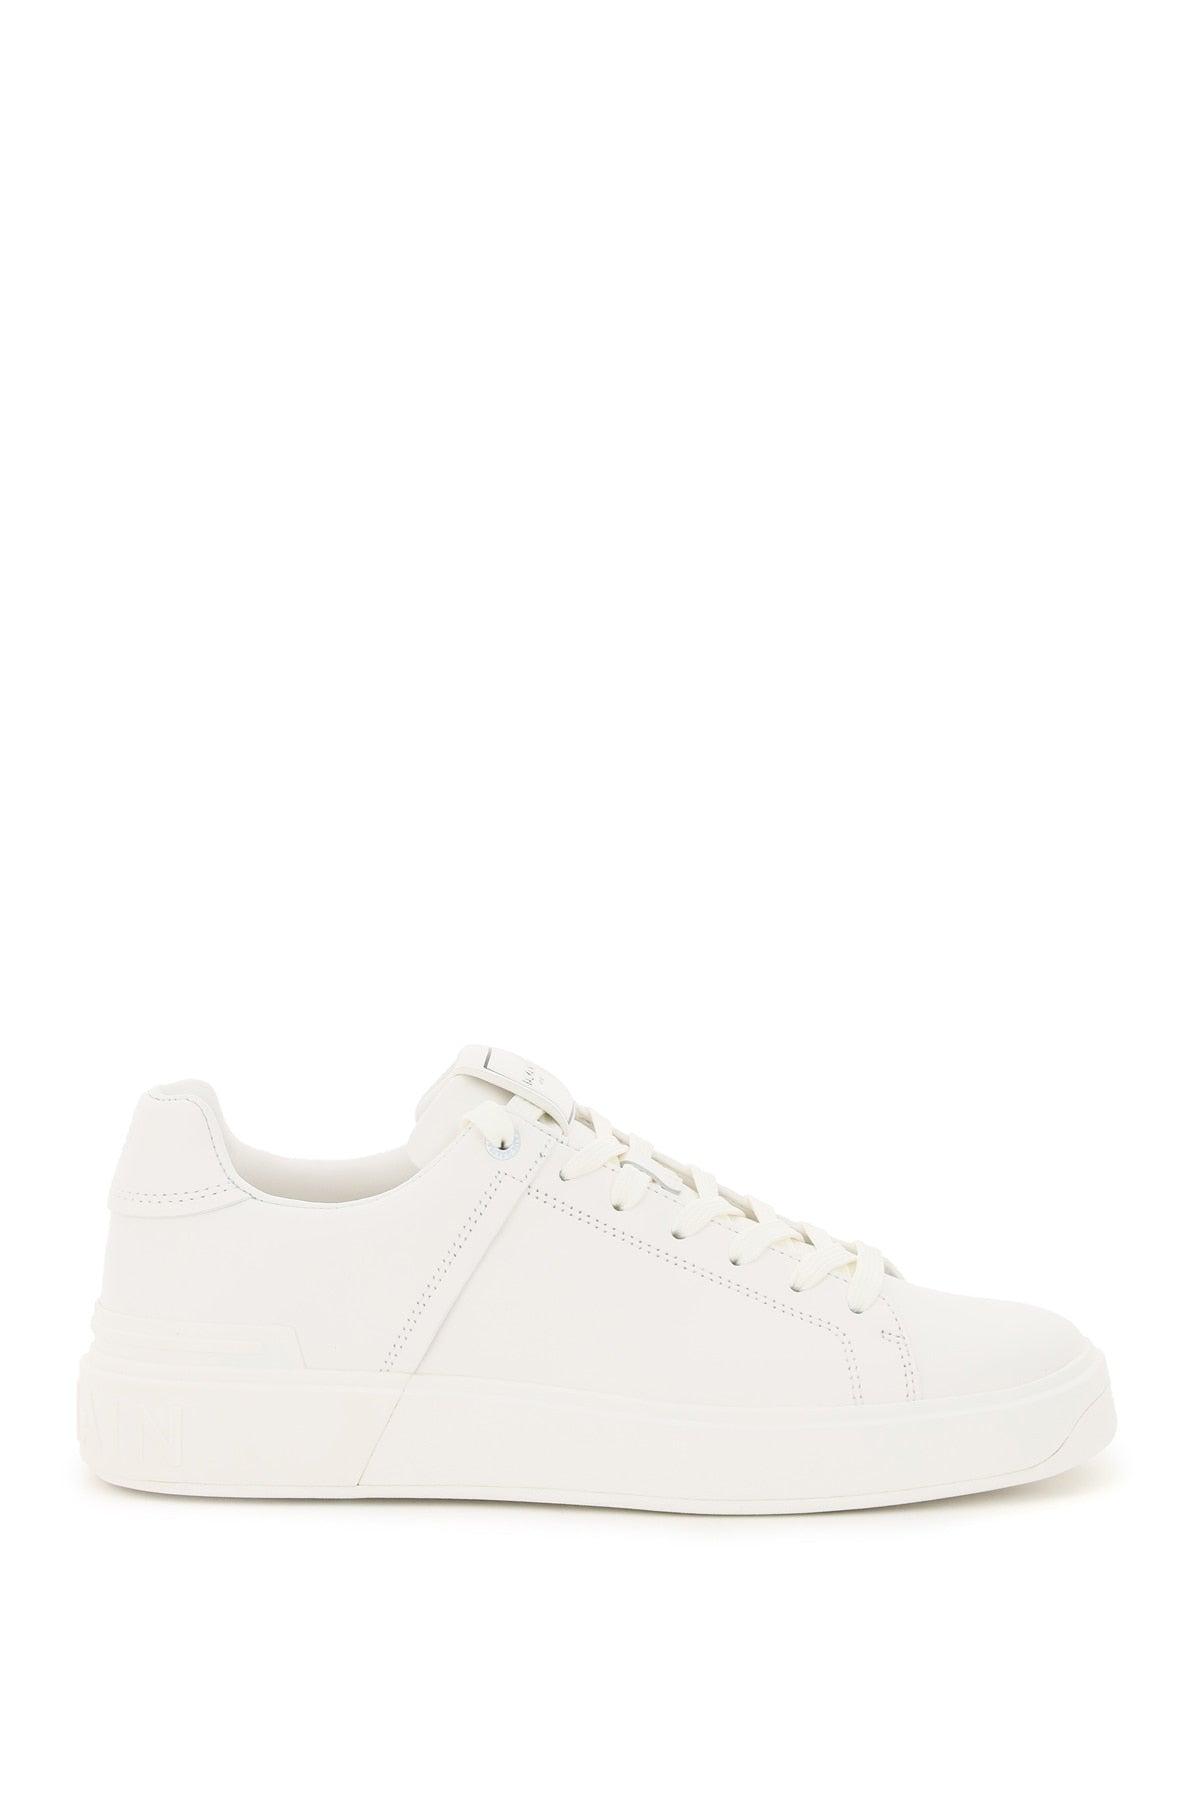 Balmain Leather B Court Sneakers in White for Men | Lyst